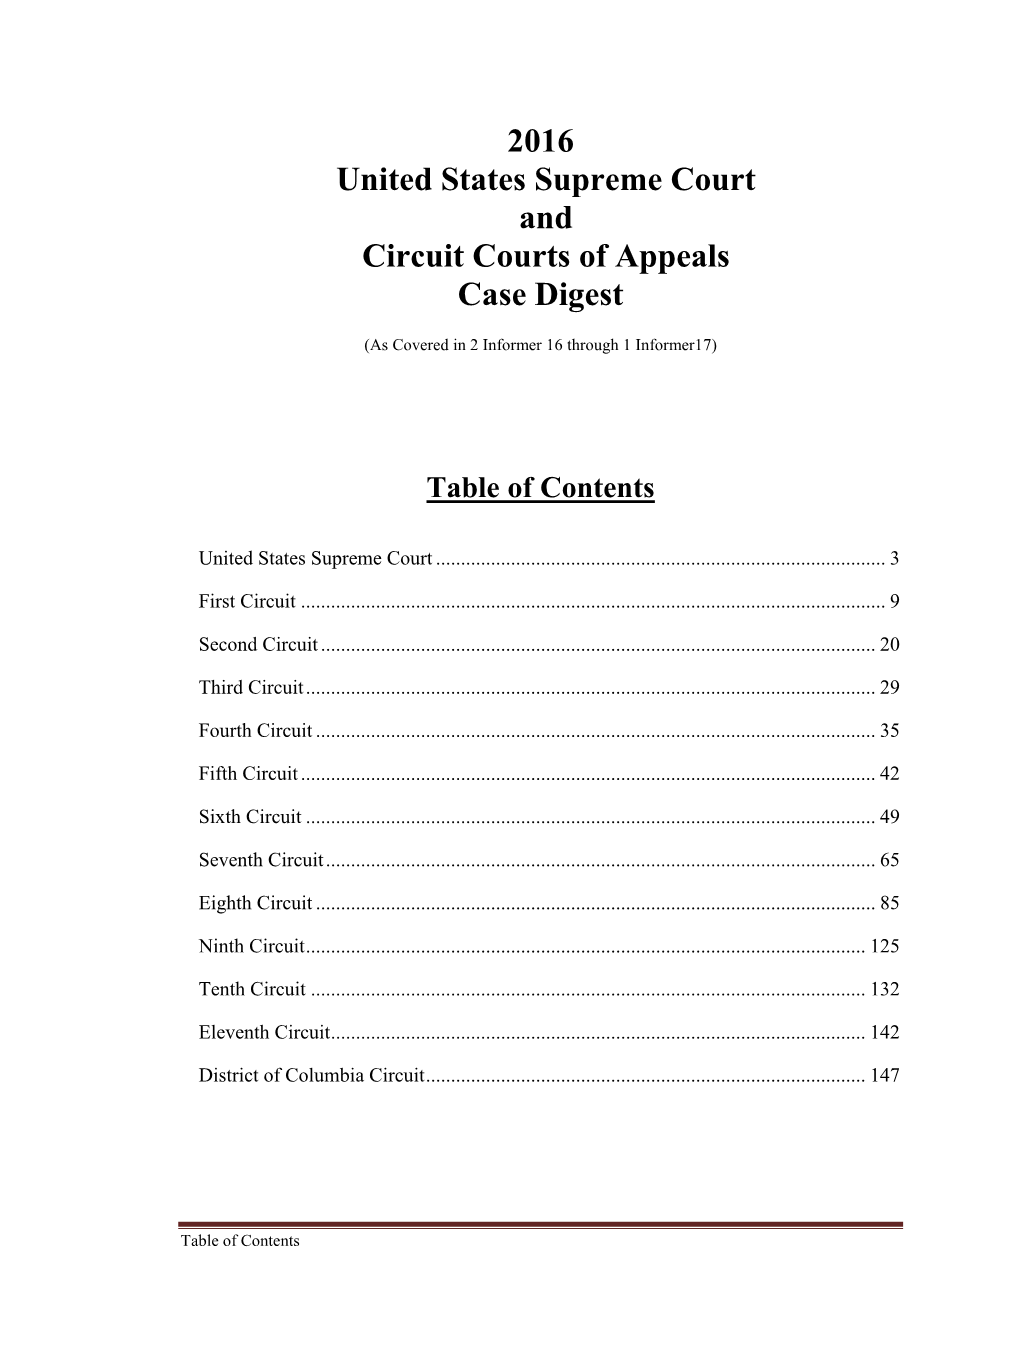 United States Supreme Court and Circuit Courts of Appeals Case Digest